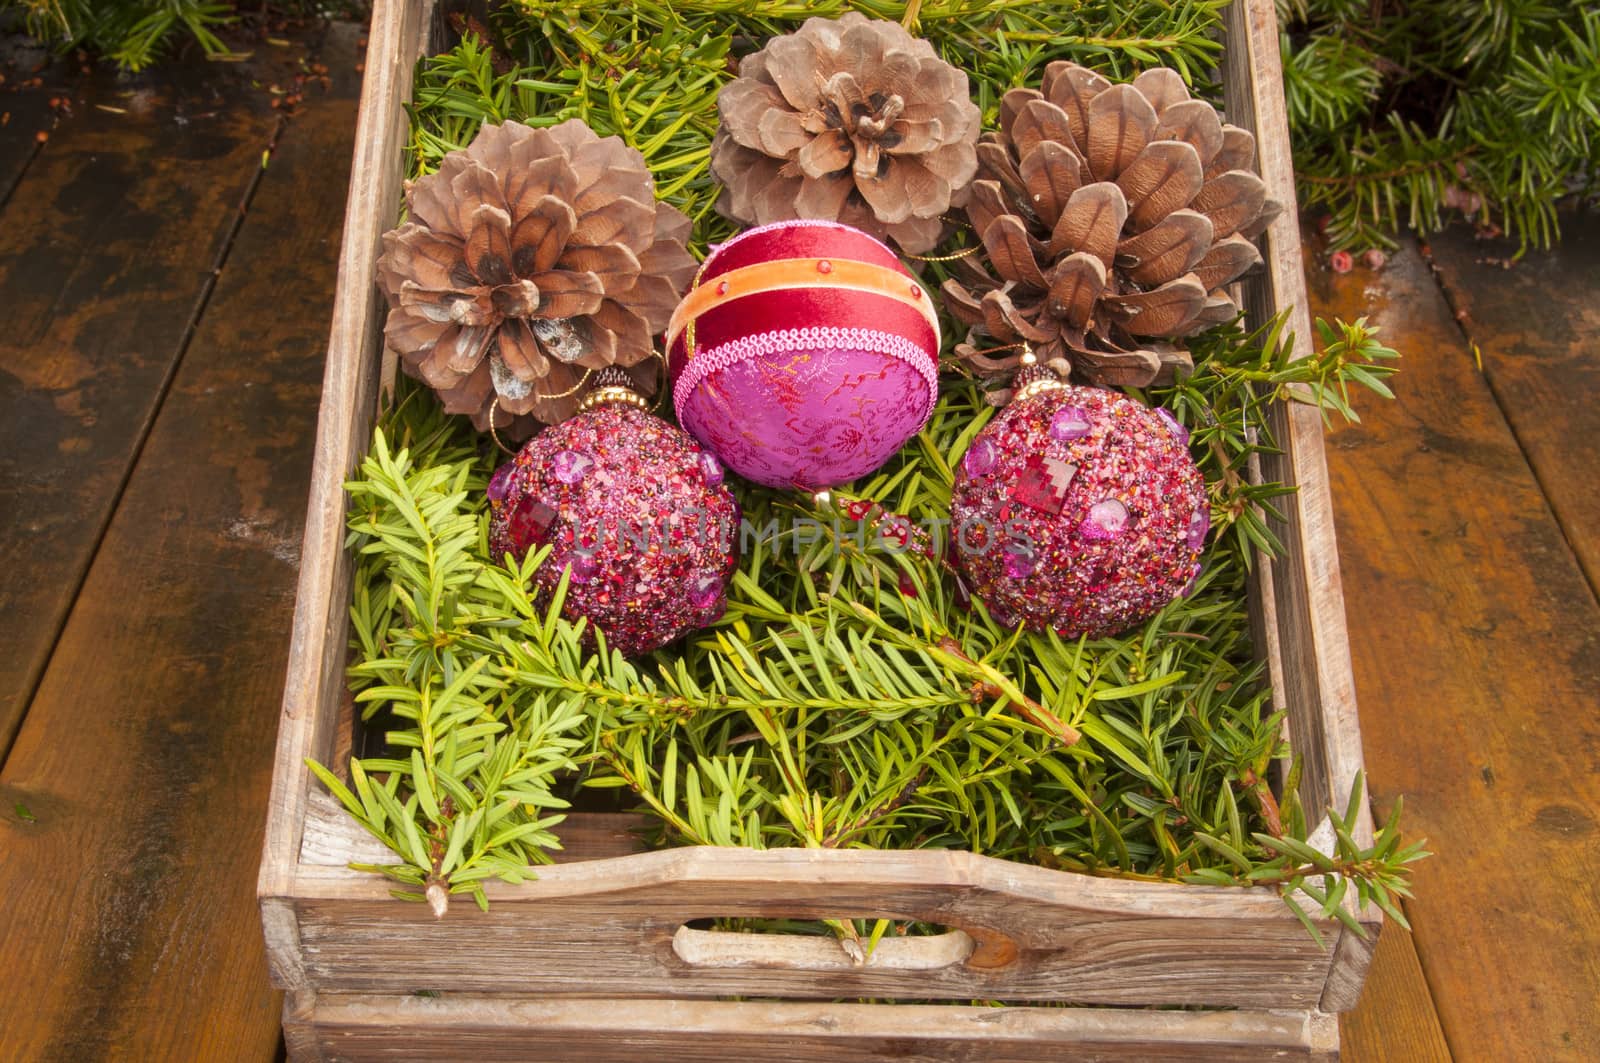 A wooden box with Christmas decorations. Without snow